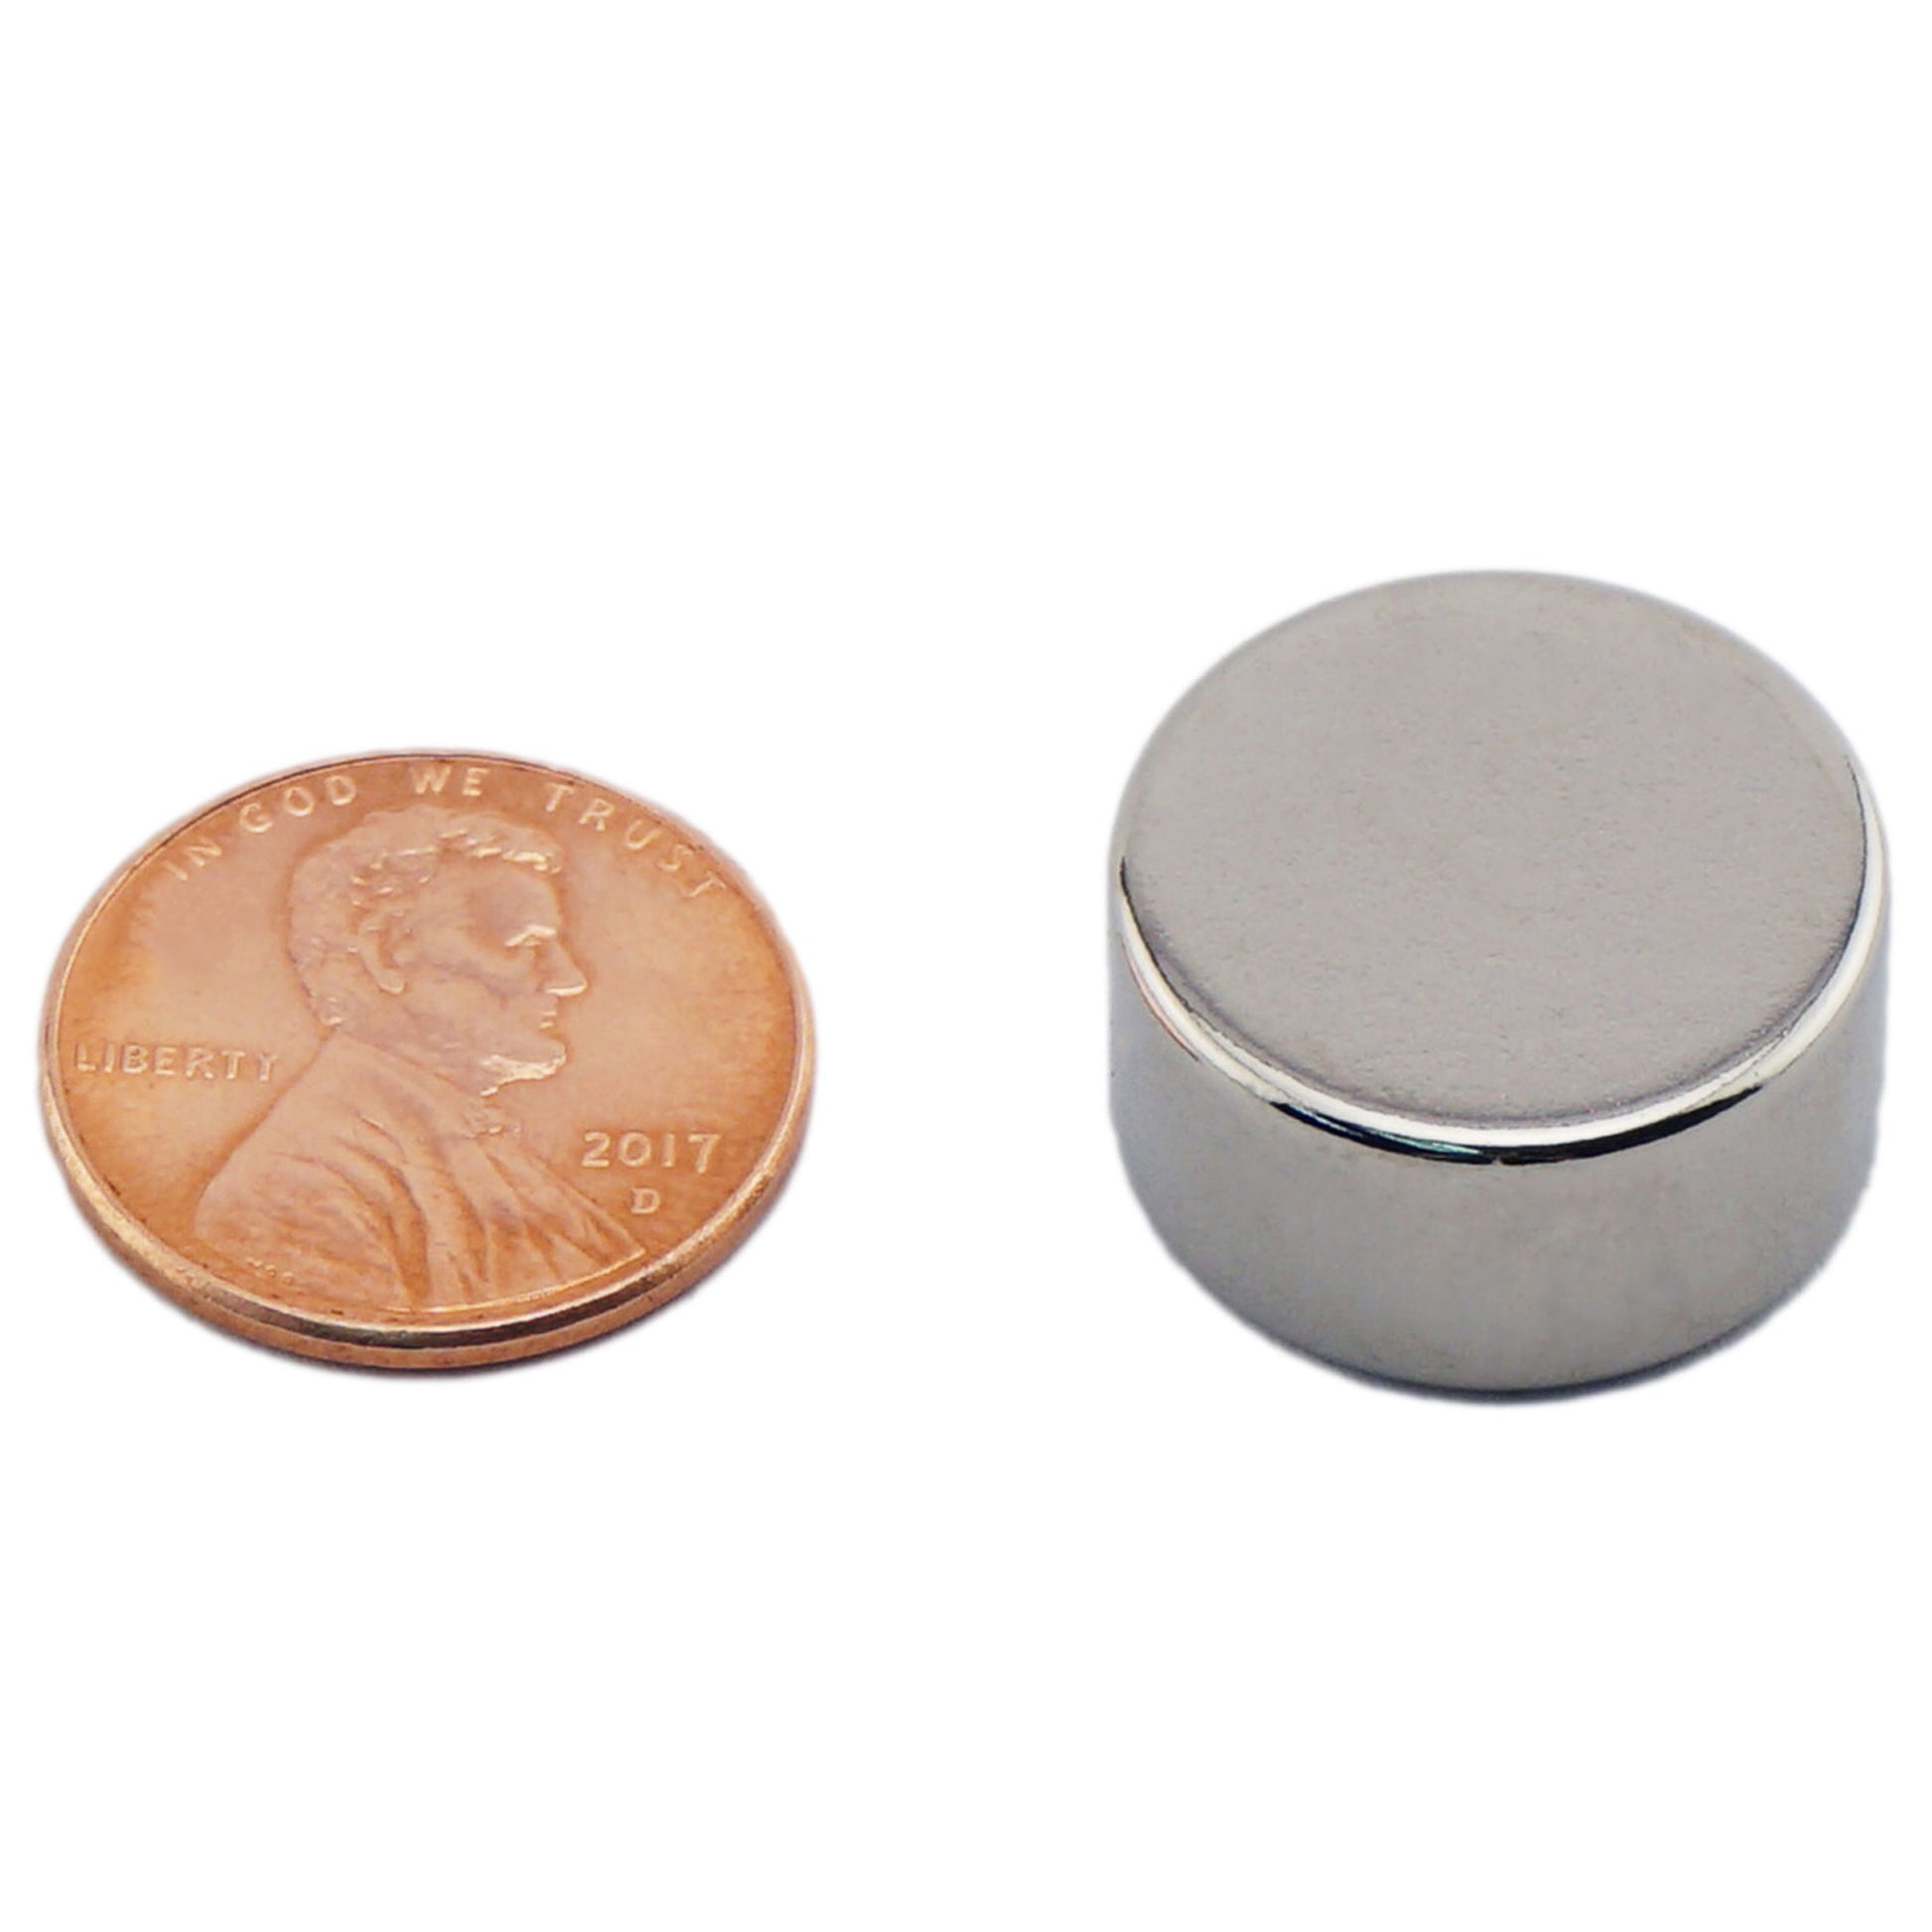 Load image into Gallery viewer, ND007526N Neodymium Disc Magnet - Compared to Penny for Size Reference